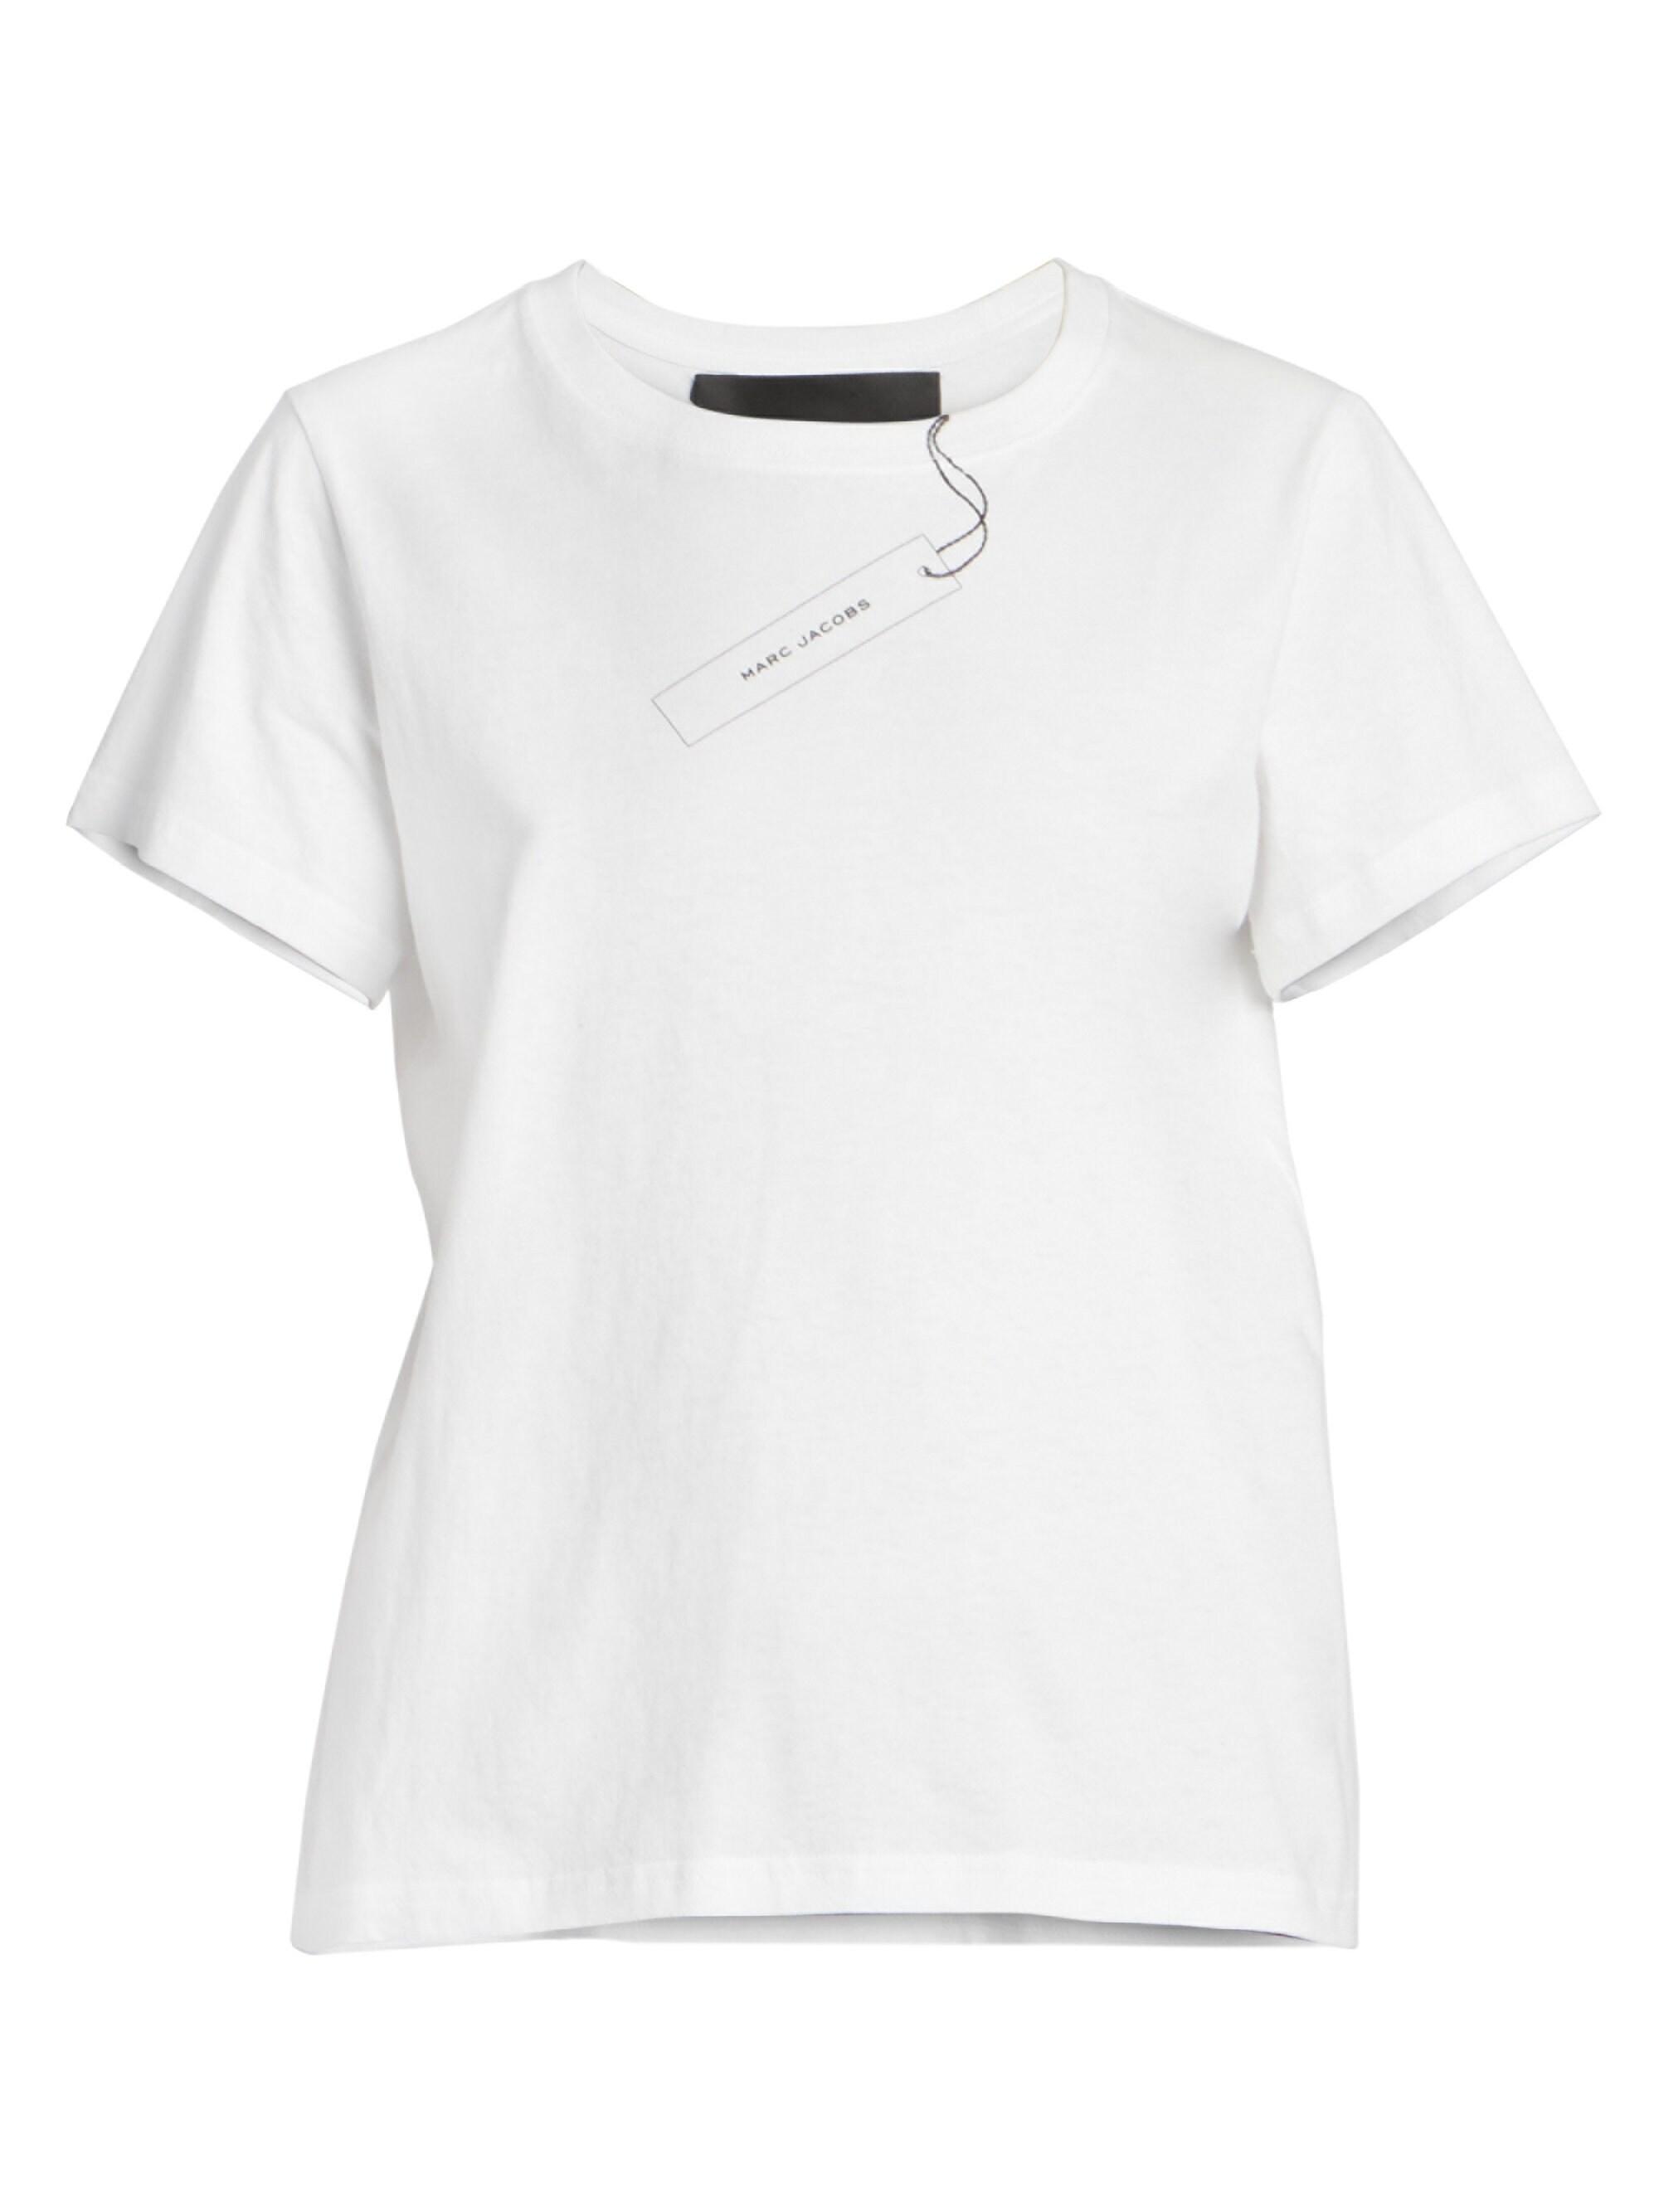 Marc Jacobs Women's The Tag T-shirt - White in White - Lyst